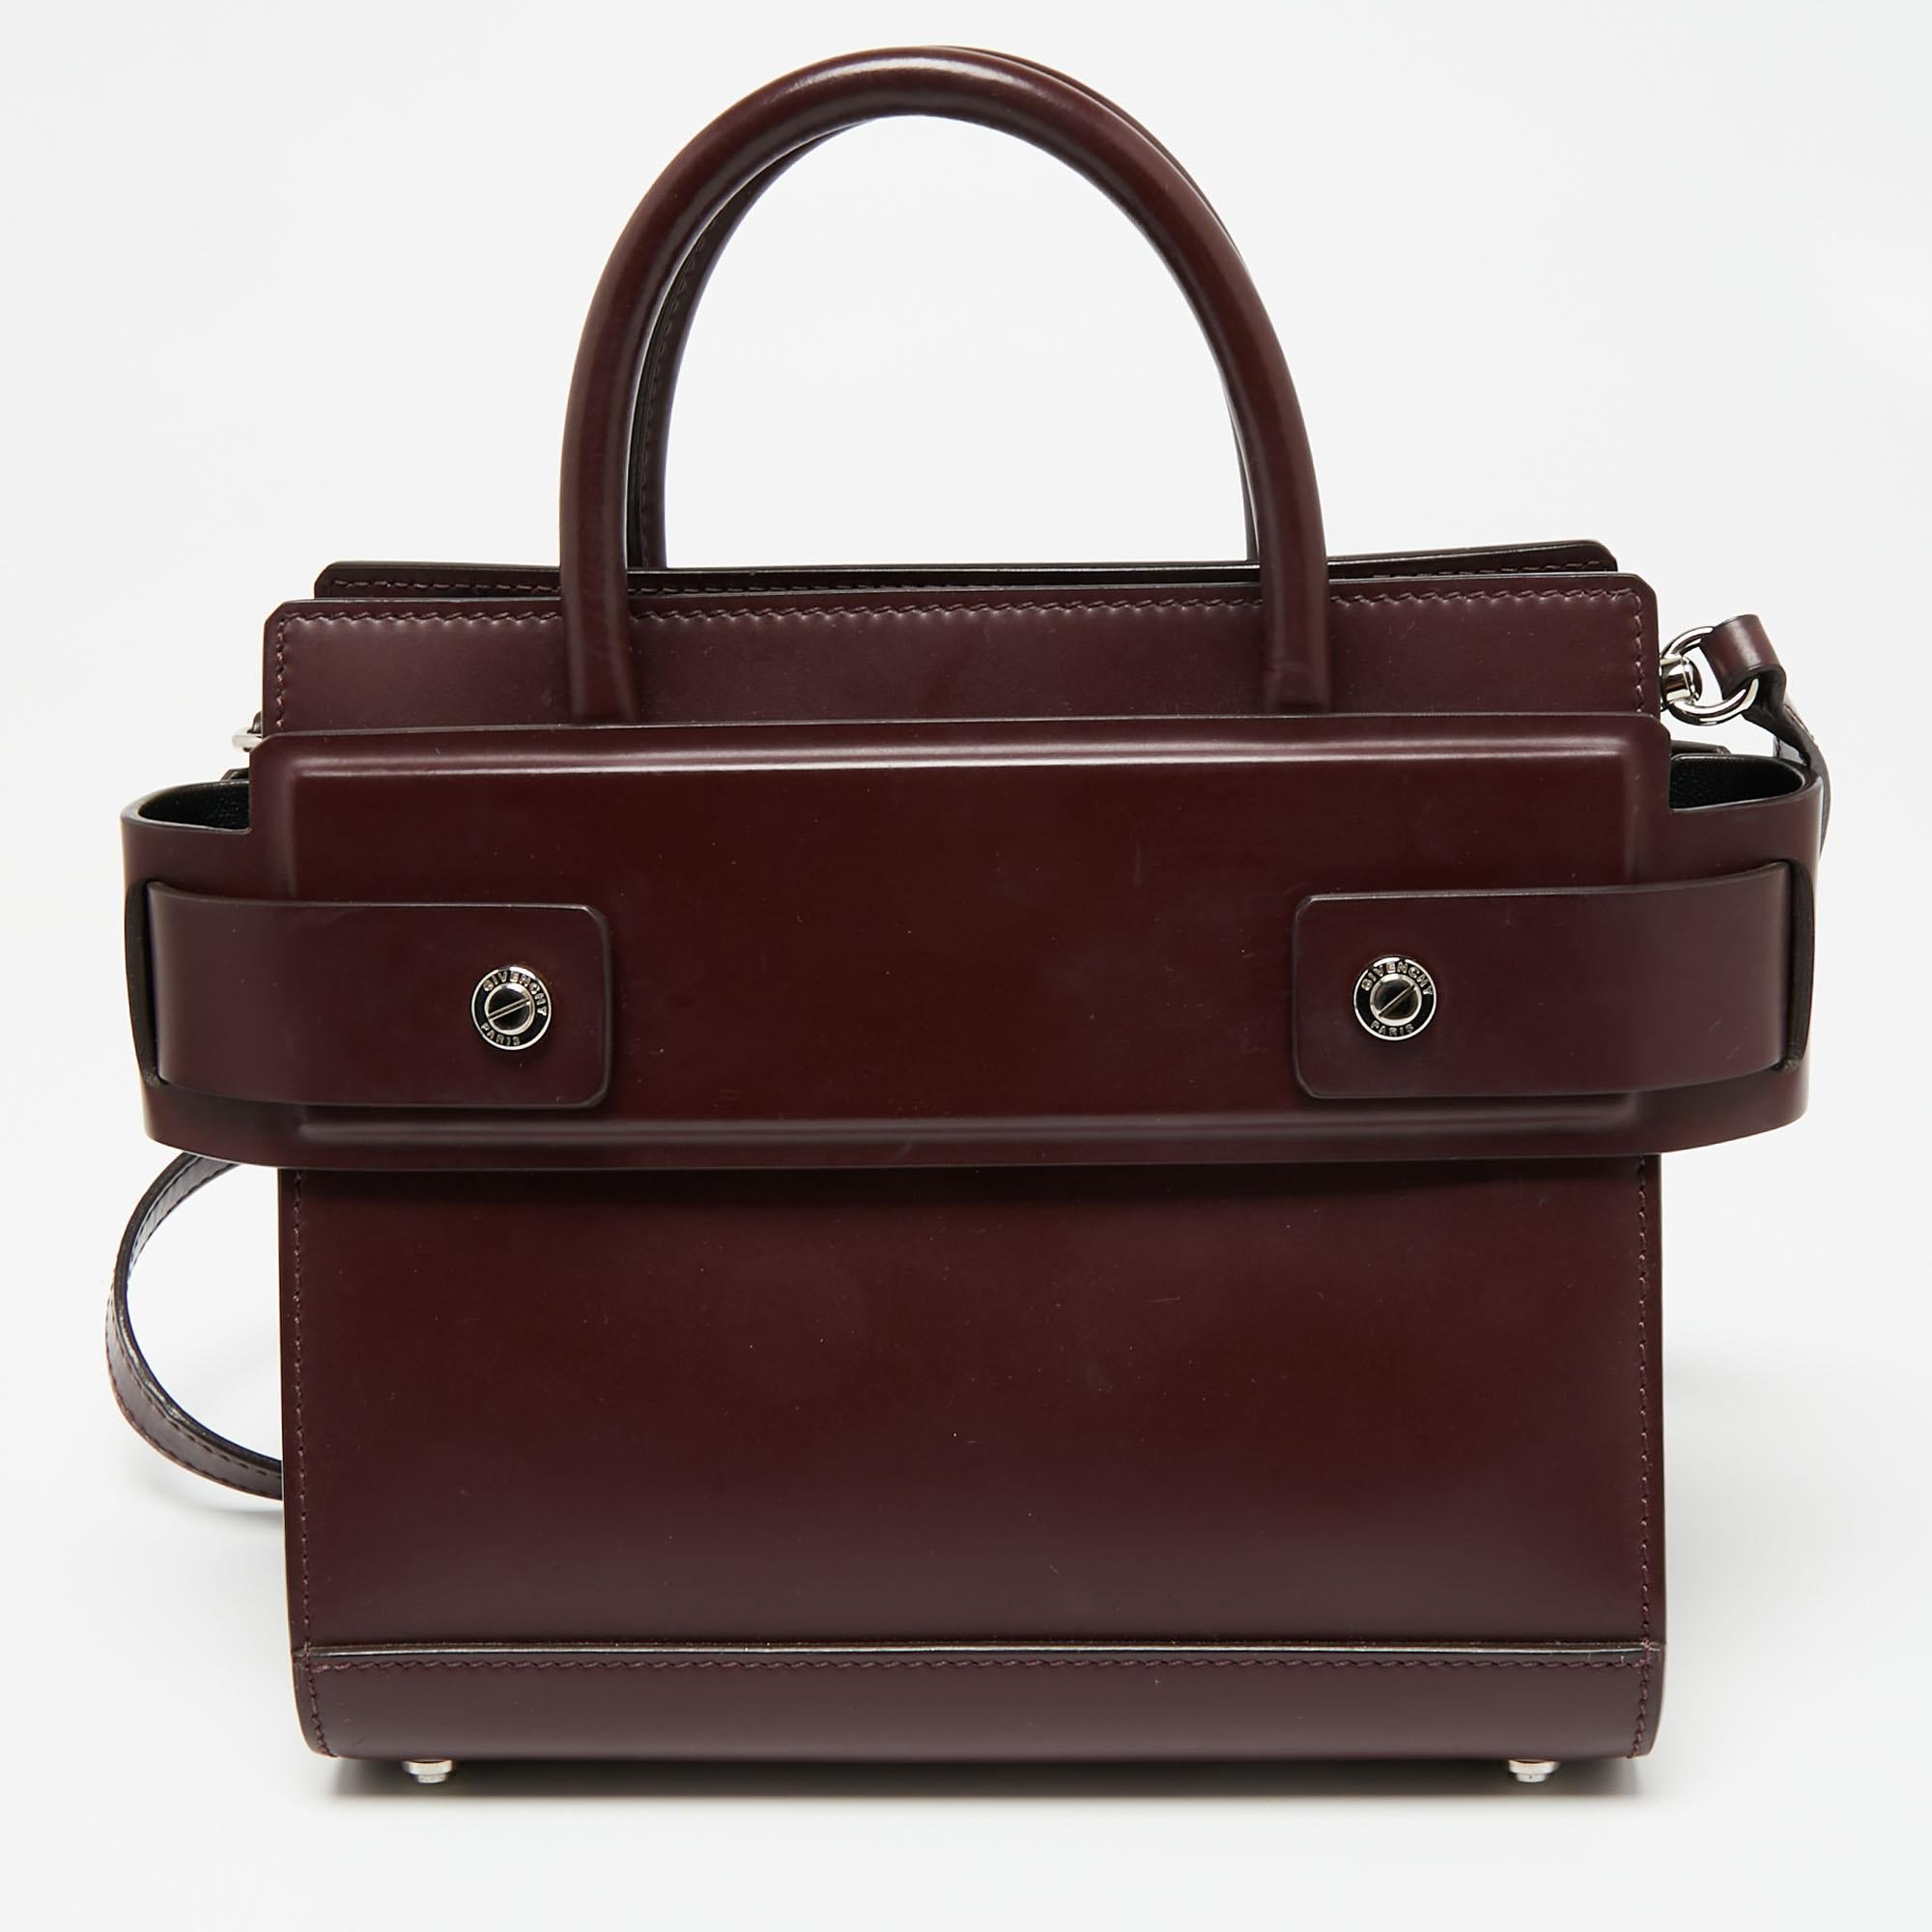 This Horizon crossbody bag from the House of Givenchy is both elegant and fashionable. Crafted from burgundy leather on the exterior, this bag features a top handle, silver-tone hardware, and a leather-lined interior. Make this stunning bag your